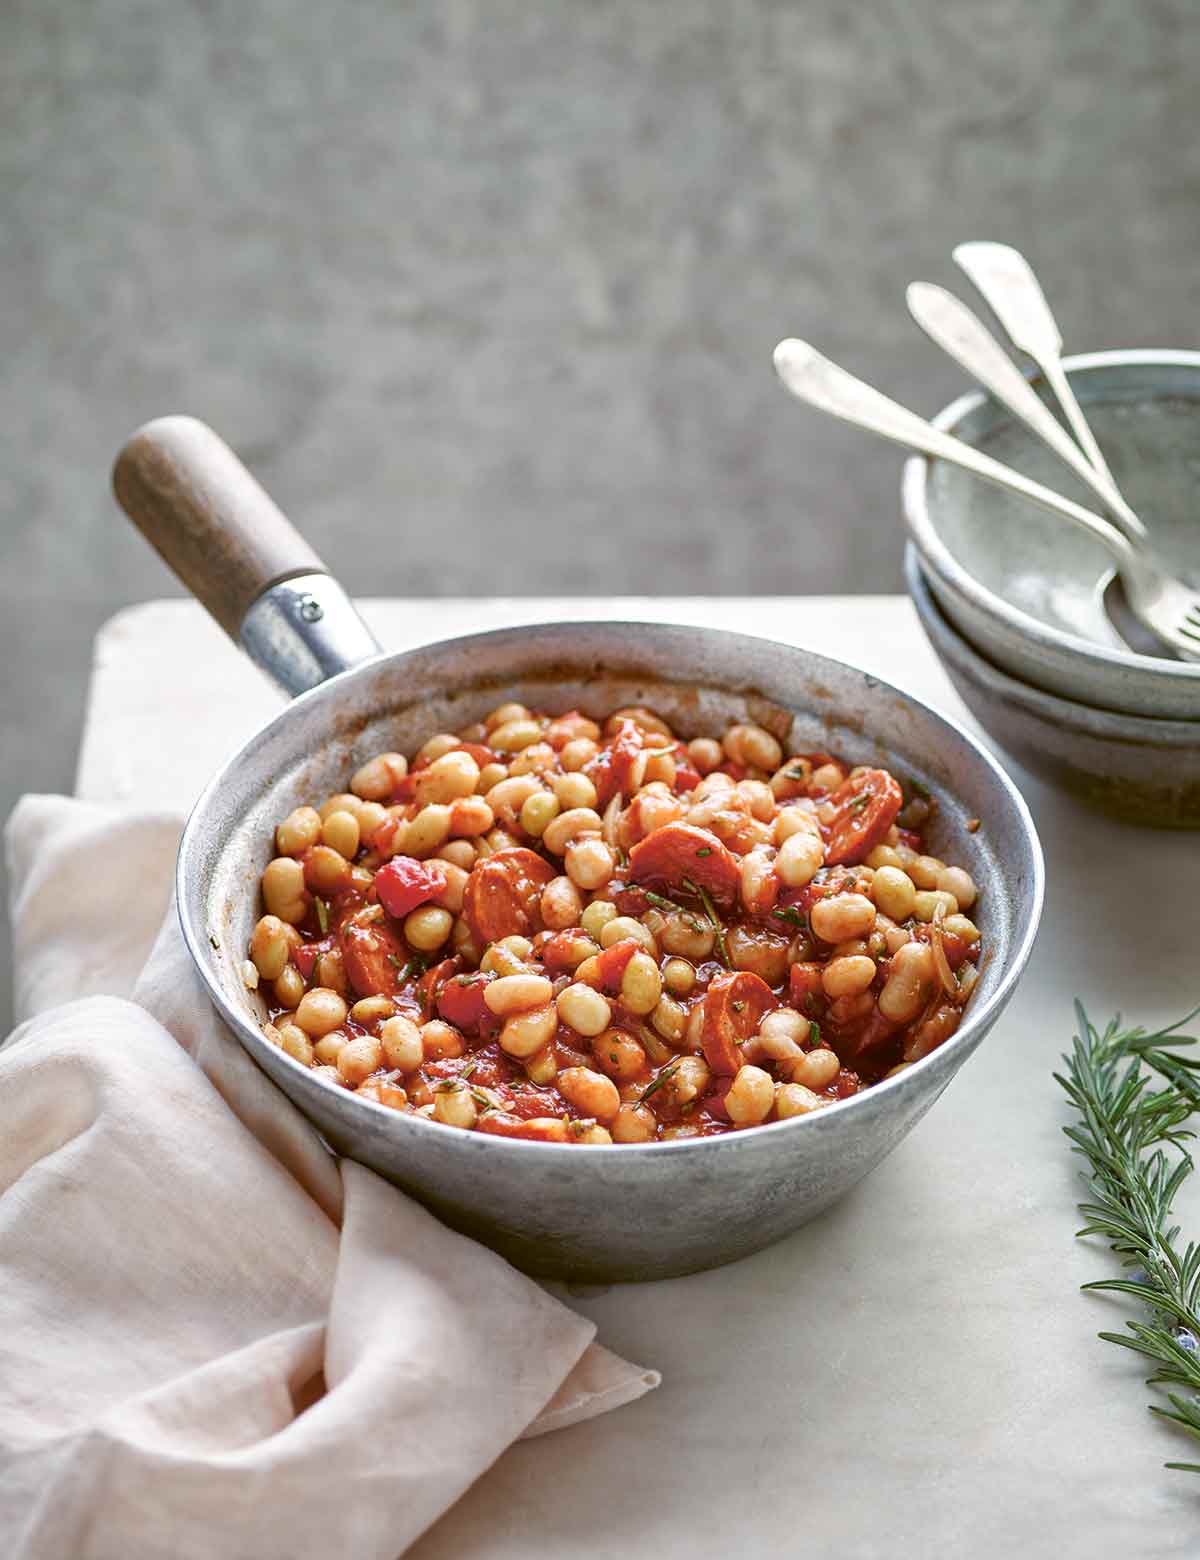 A metal pot filled with white bean stew with tomatoes and rosemary, with bowls, napkins and utensils in the background.